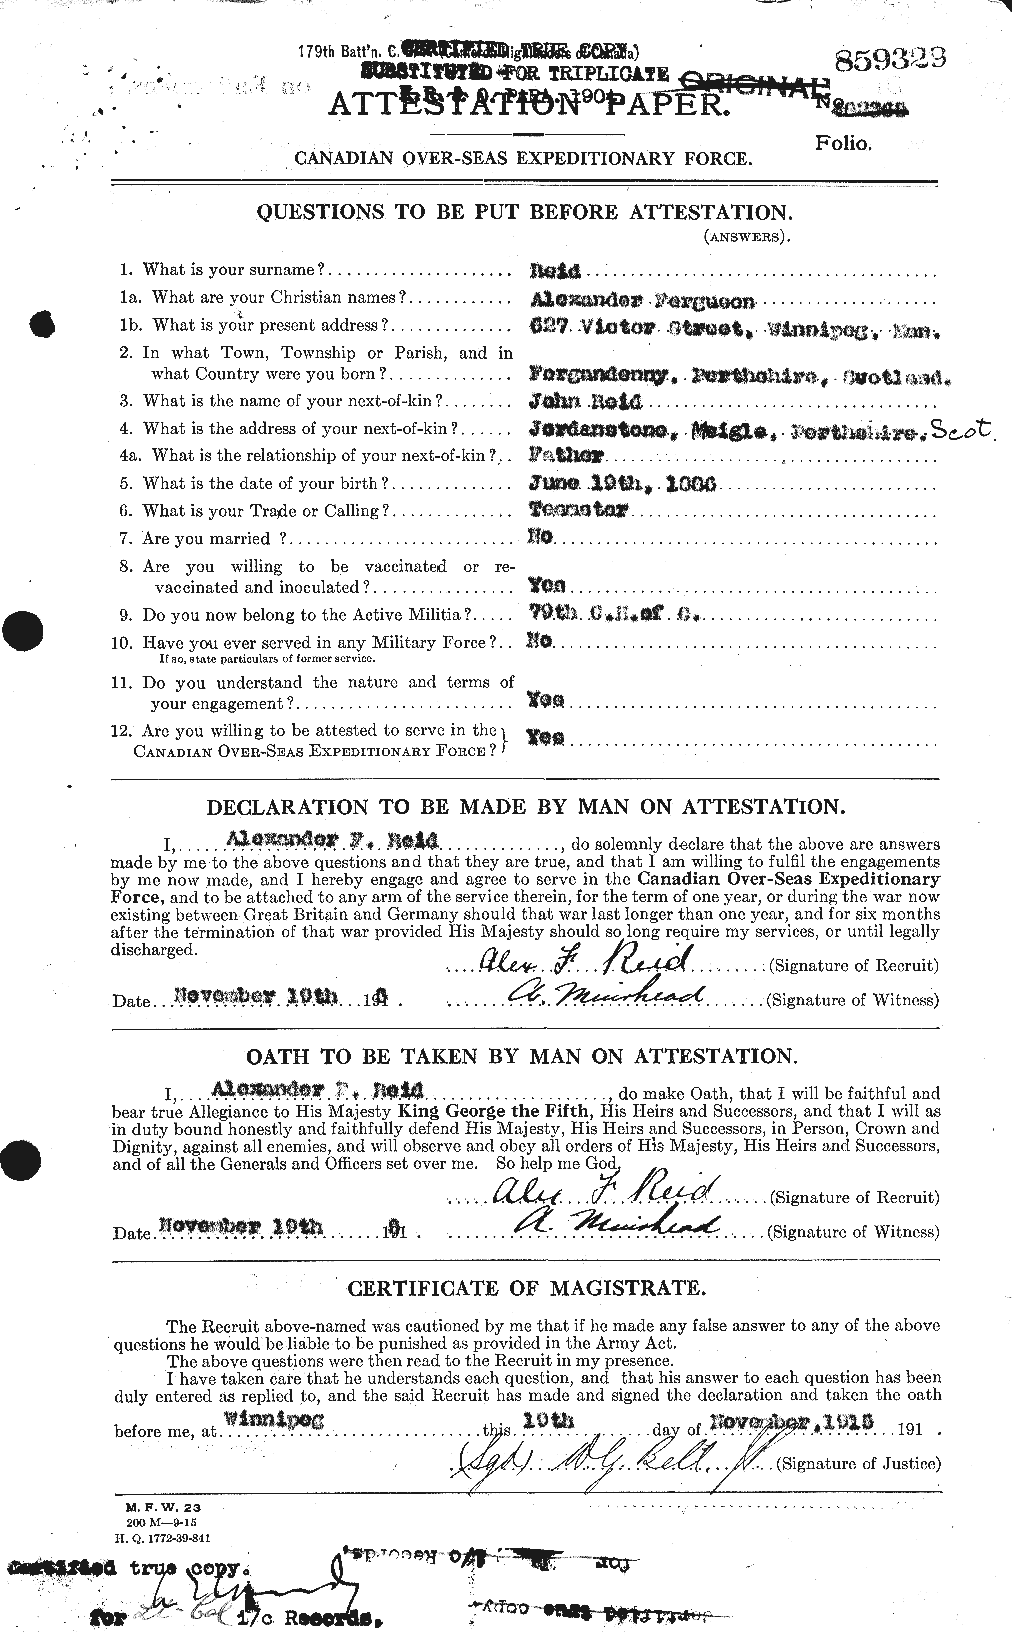 Personnel Records of the First World War - CEF 597778a